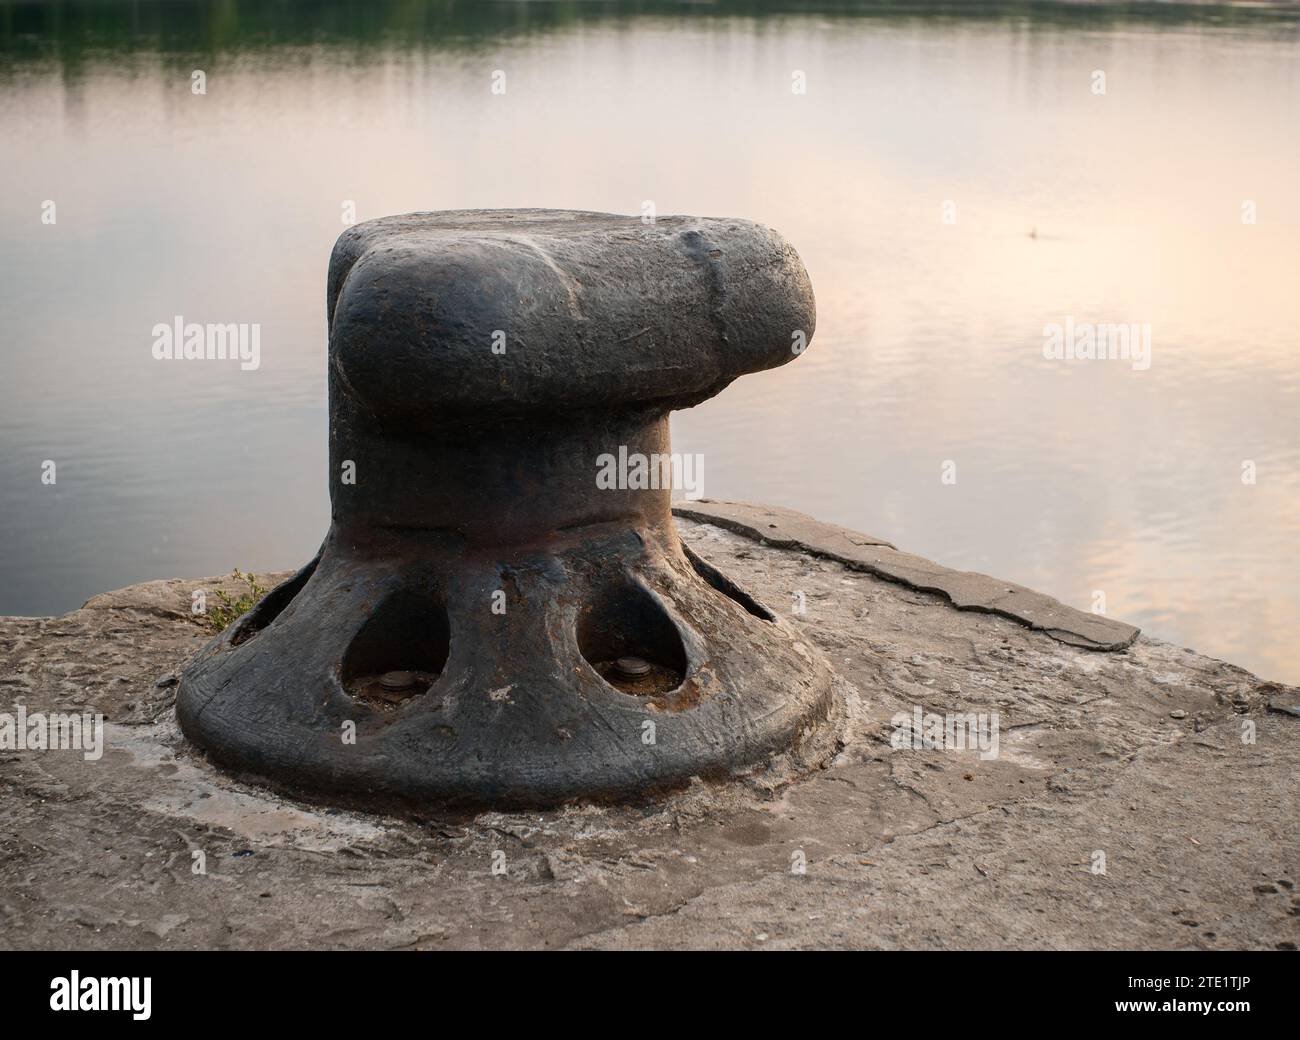 Mooring bollard on the background of the river in soft focus at sunset Stock Photo